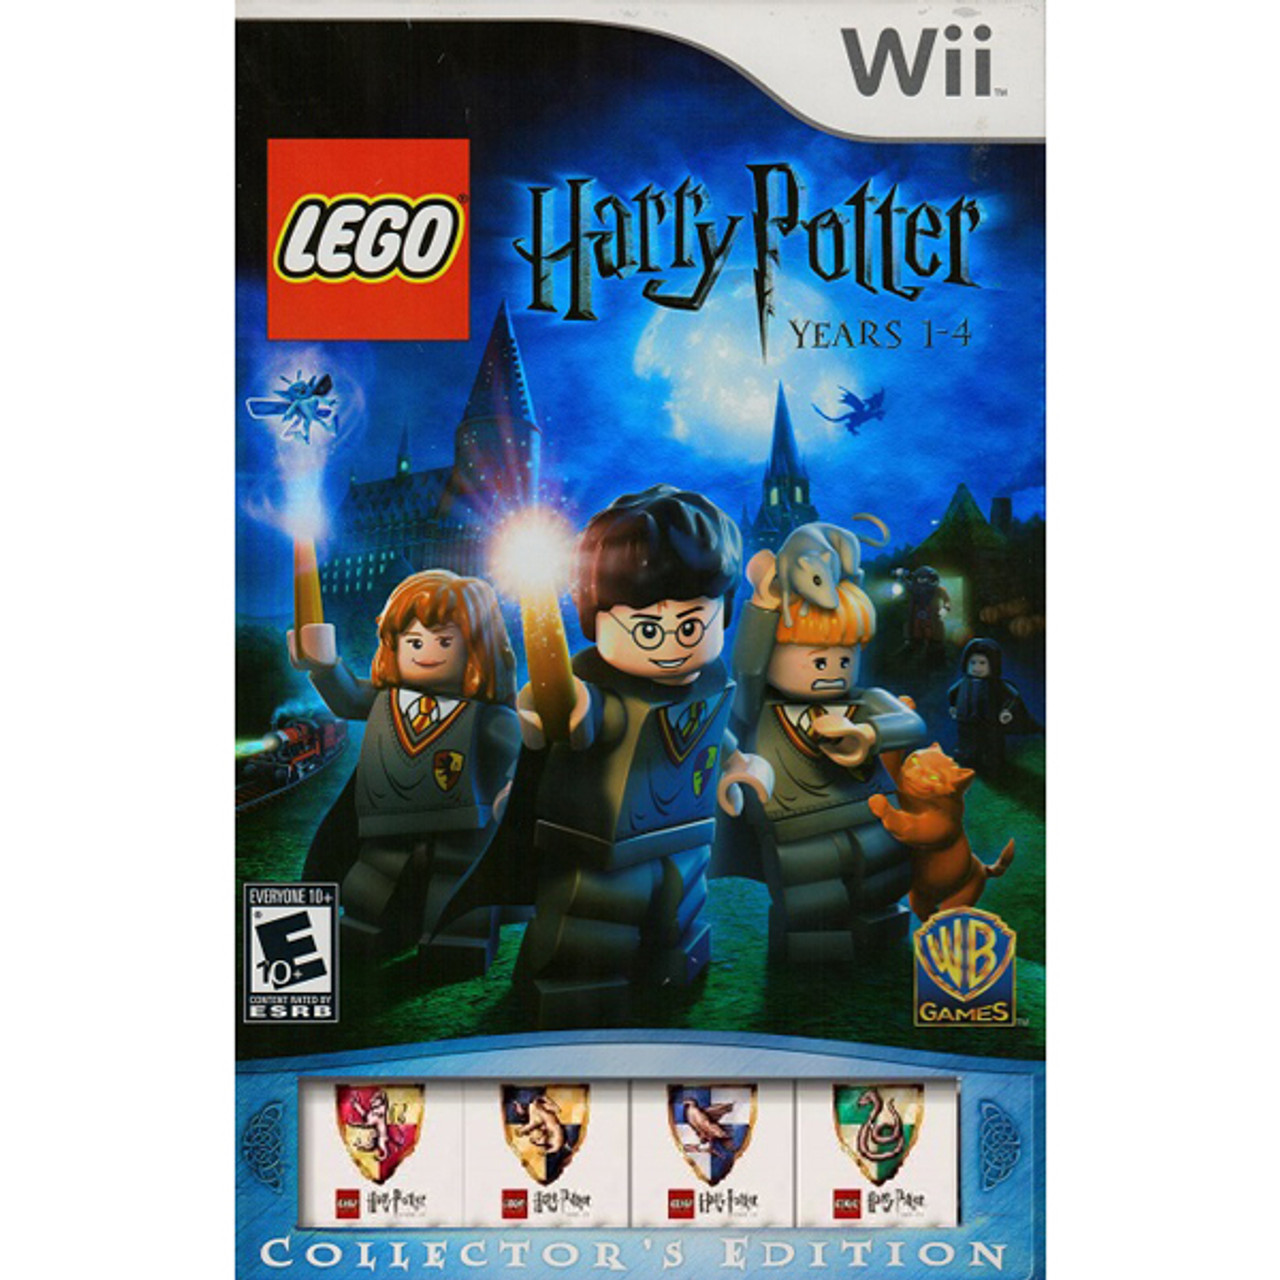 LEGO® Harry Potter: Years 1 - 4, Wii, Games